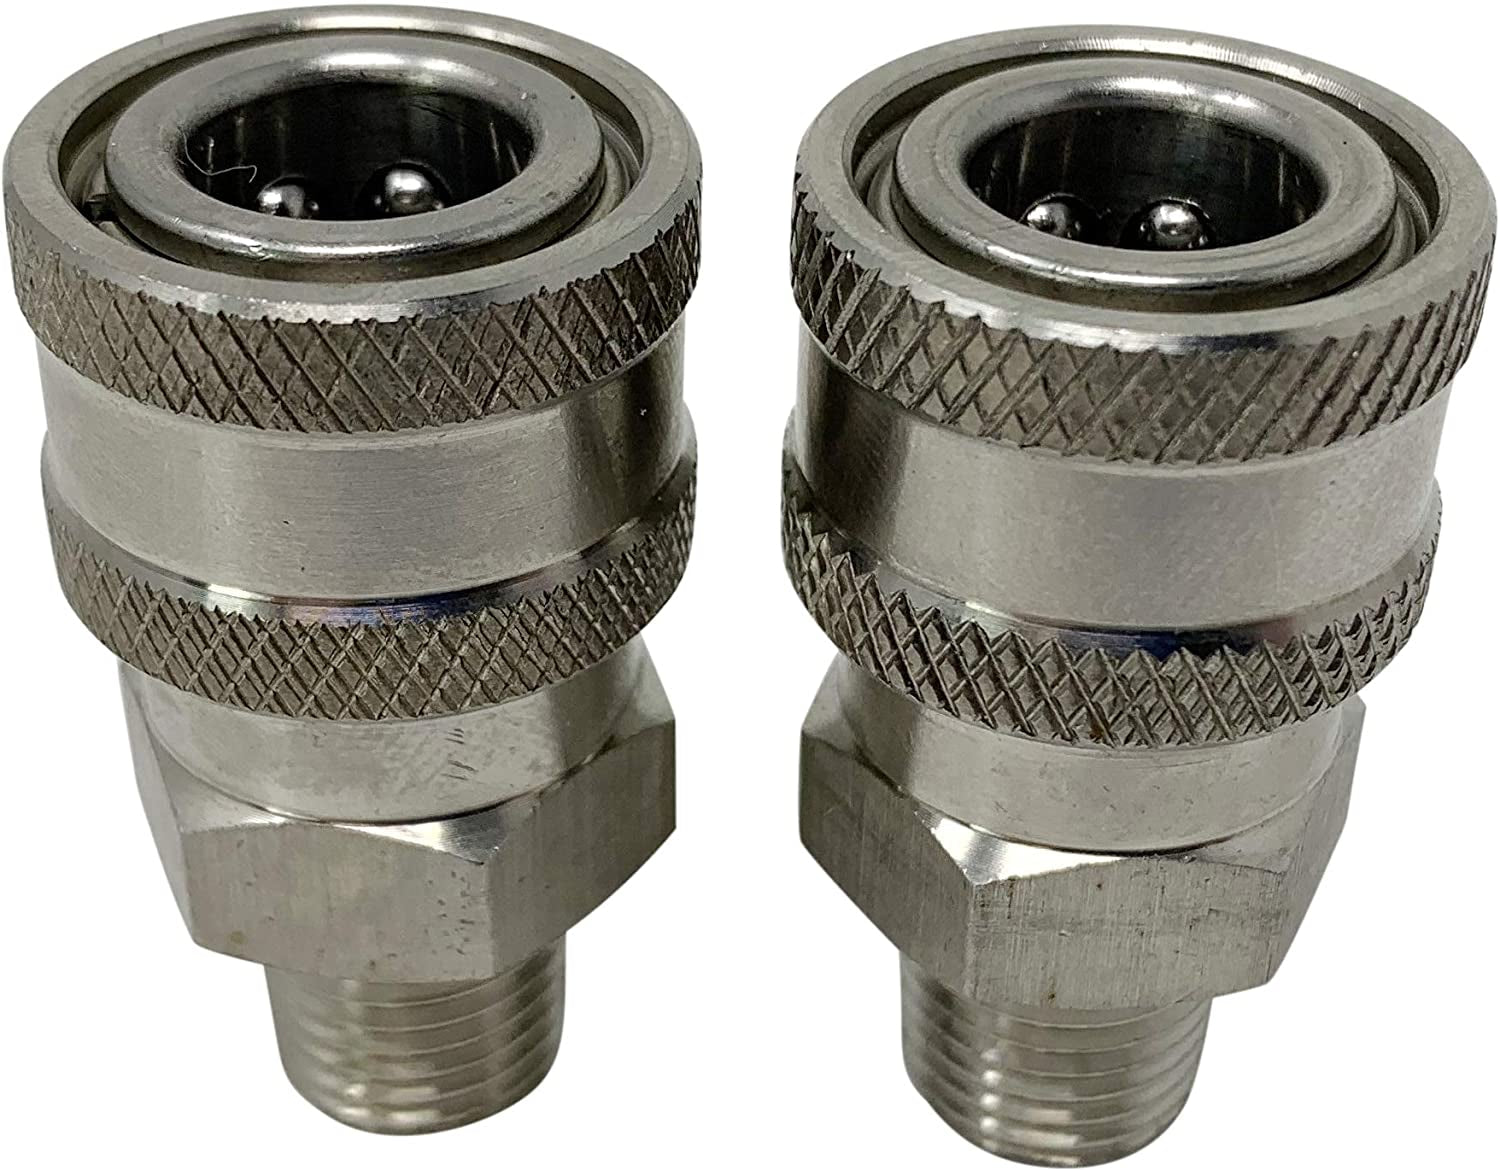 ESSENTIAL WASHER, ESSENTIAL WASHER Pressure Washer Fittings 3/8" Stainless Steel Male NPT Quick Connect Couplers - 2-Pack Fitting Set (3/8 Inch MPT - Set of 2)